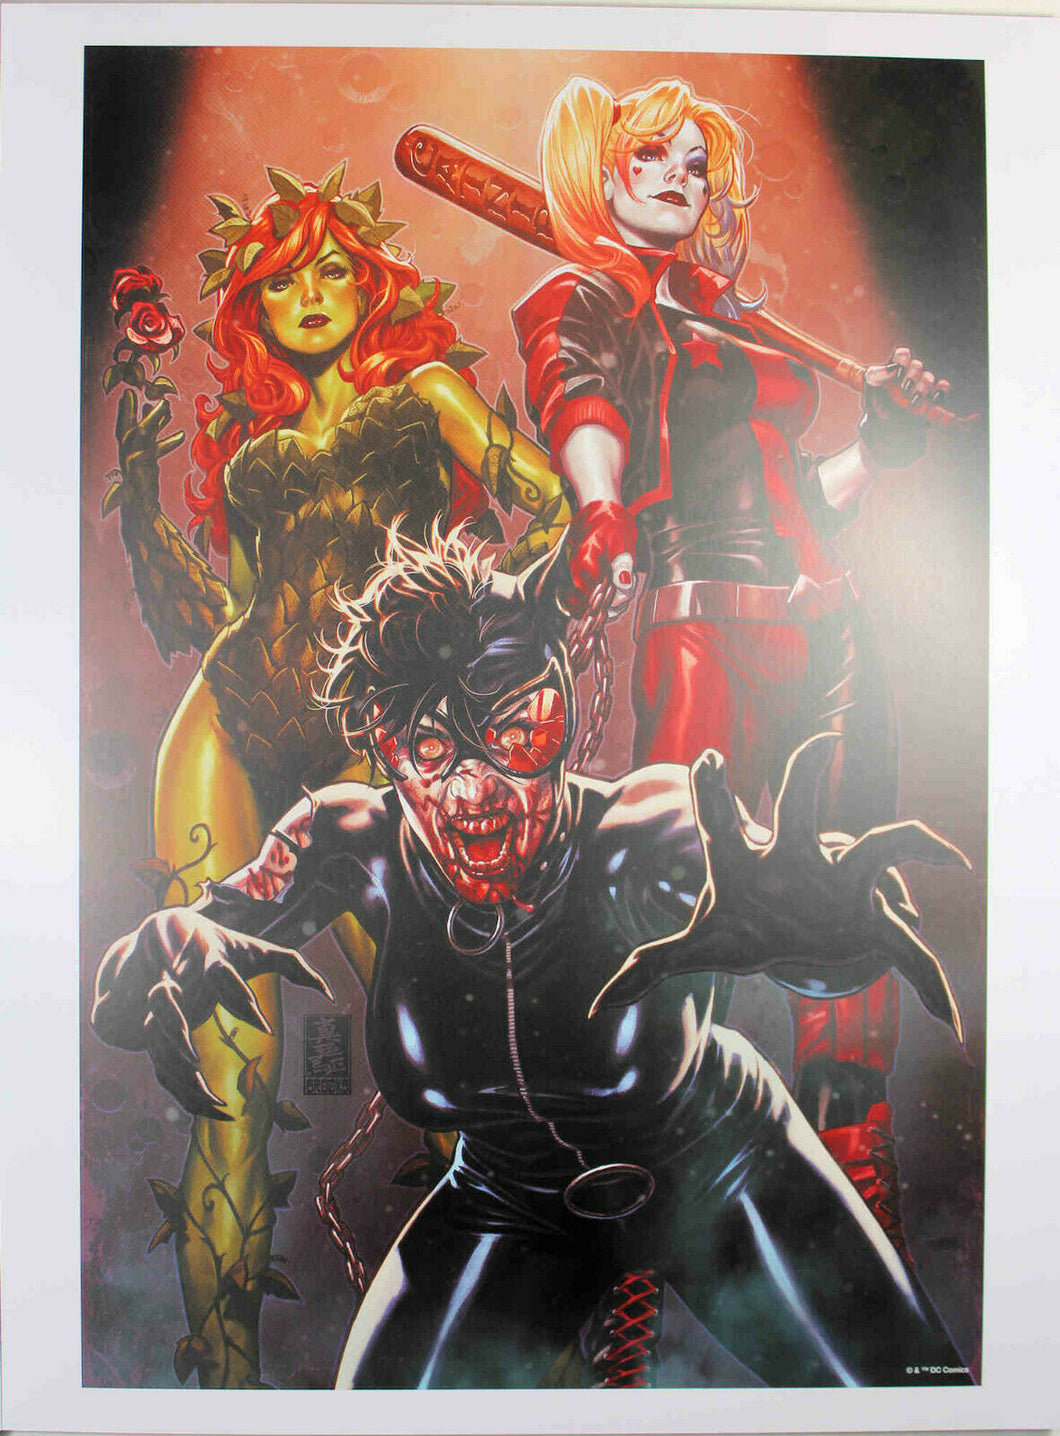 DCEASED #4 (HARLEY, IVY, CATWOMAN) ART PRINT by Mark Brooks ~ 12